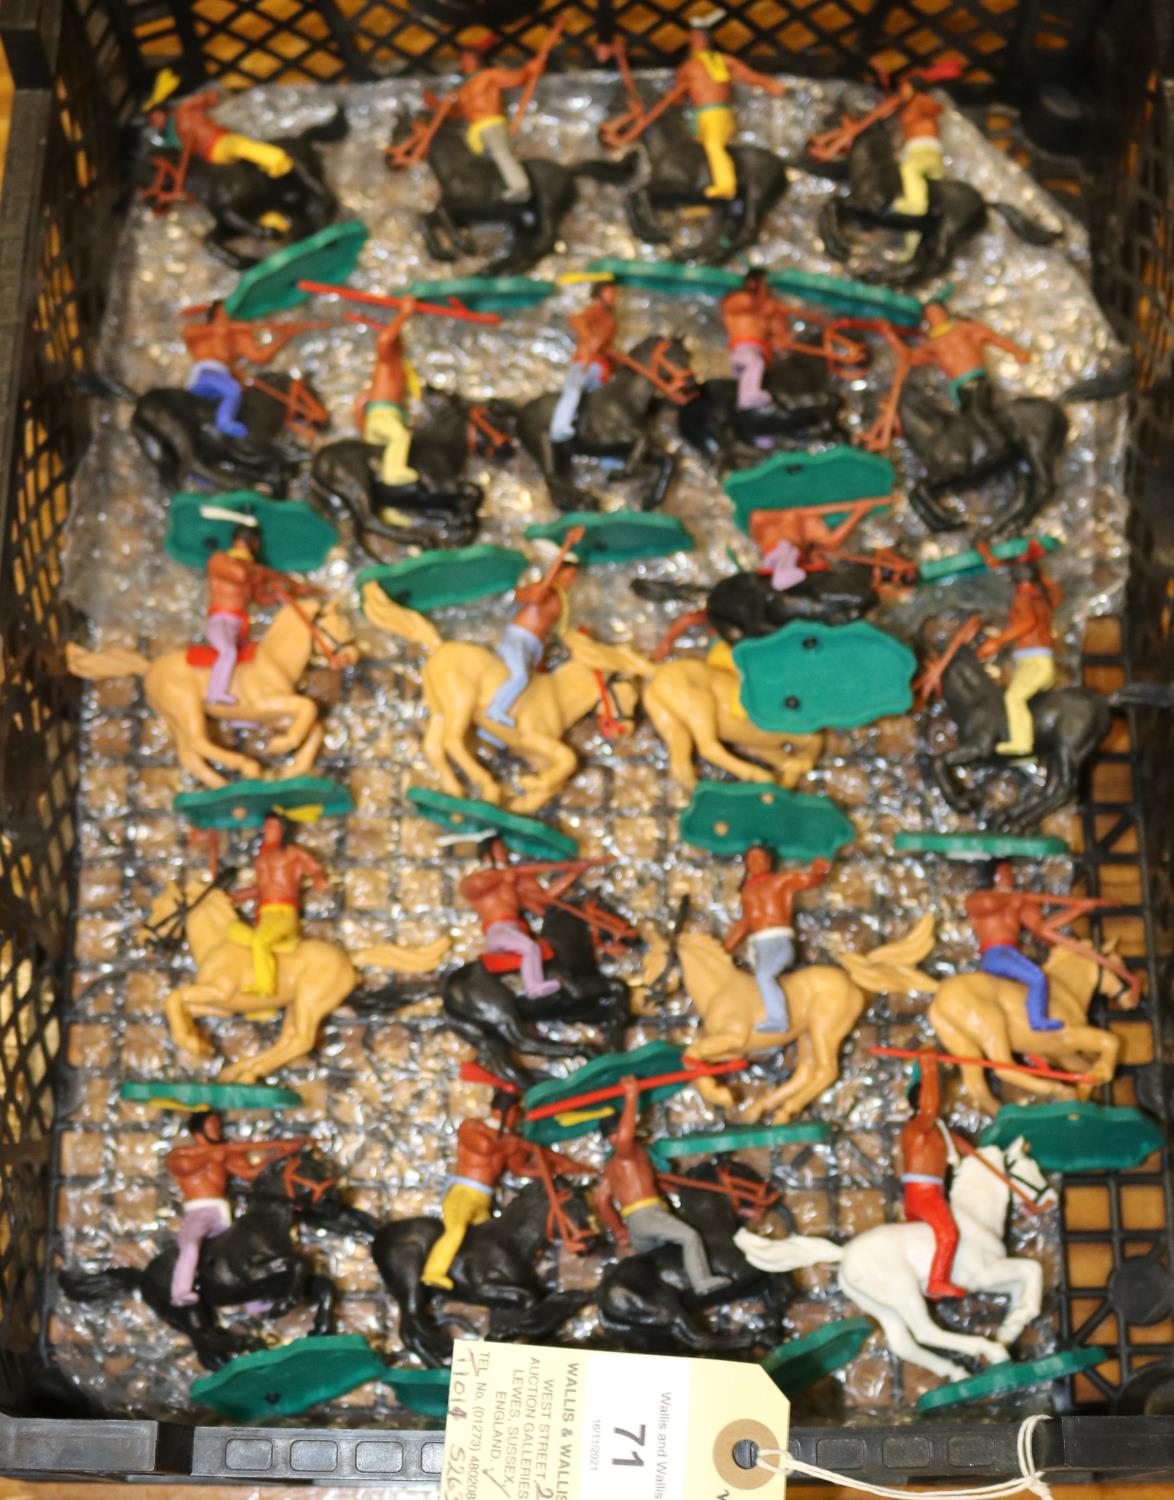 21 Timpo mounted Indians mixed light/ dark brown and also white horses mounted on green plastic